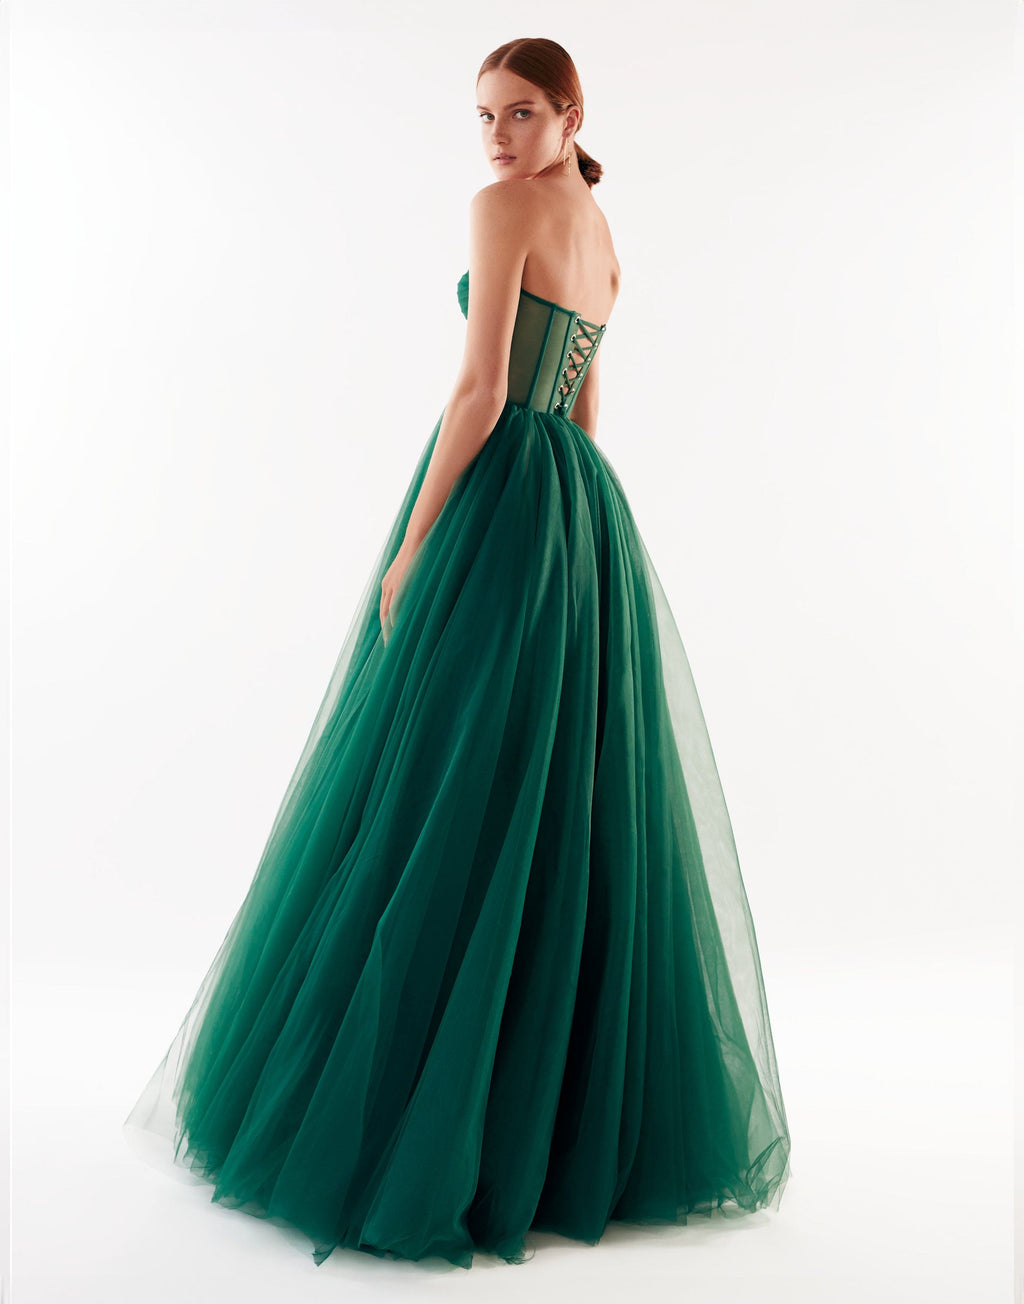 Emerald Green Tulle Maxi Dress with a Corset Bustier